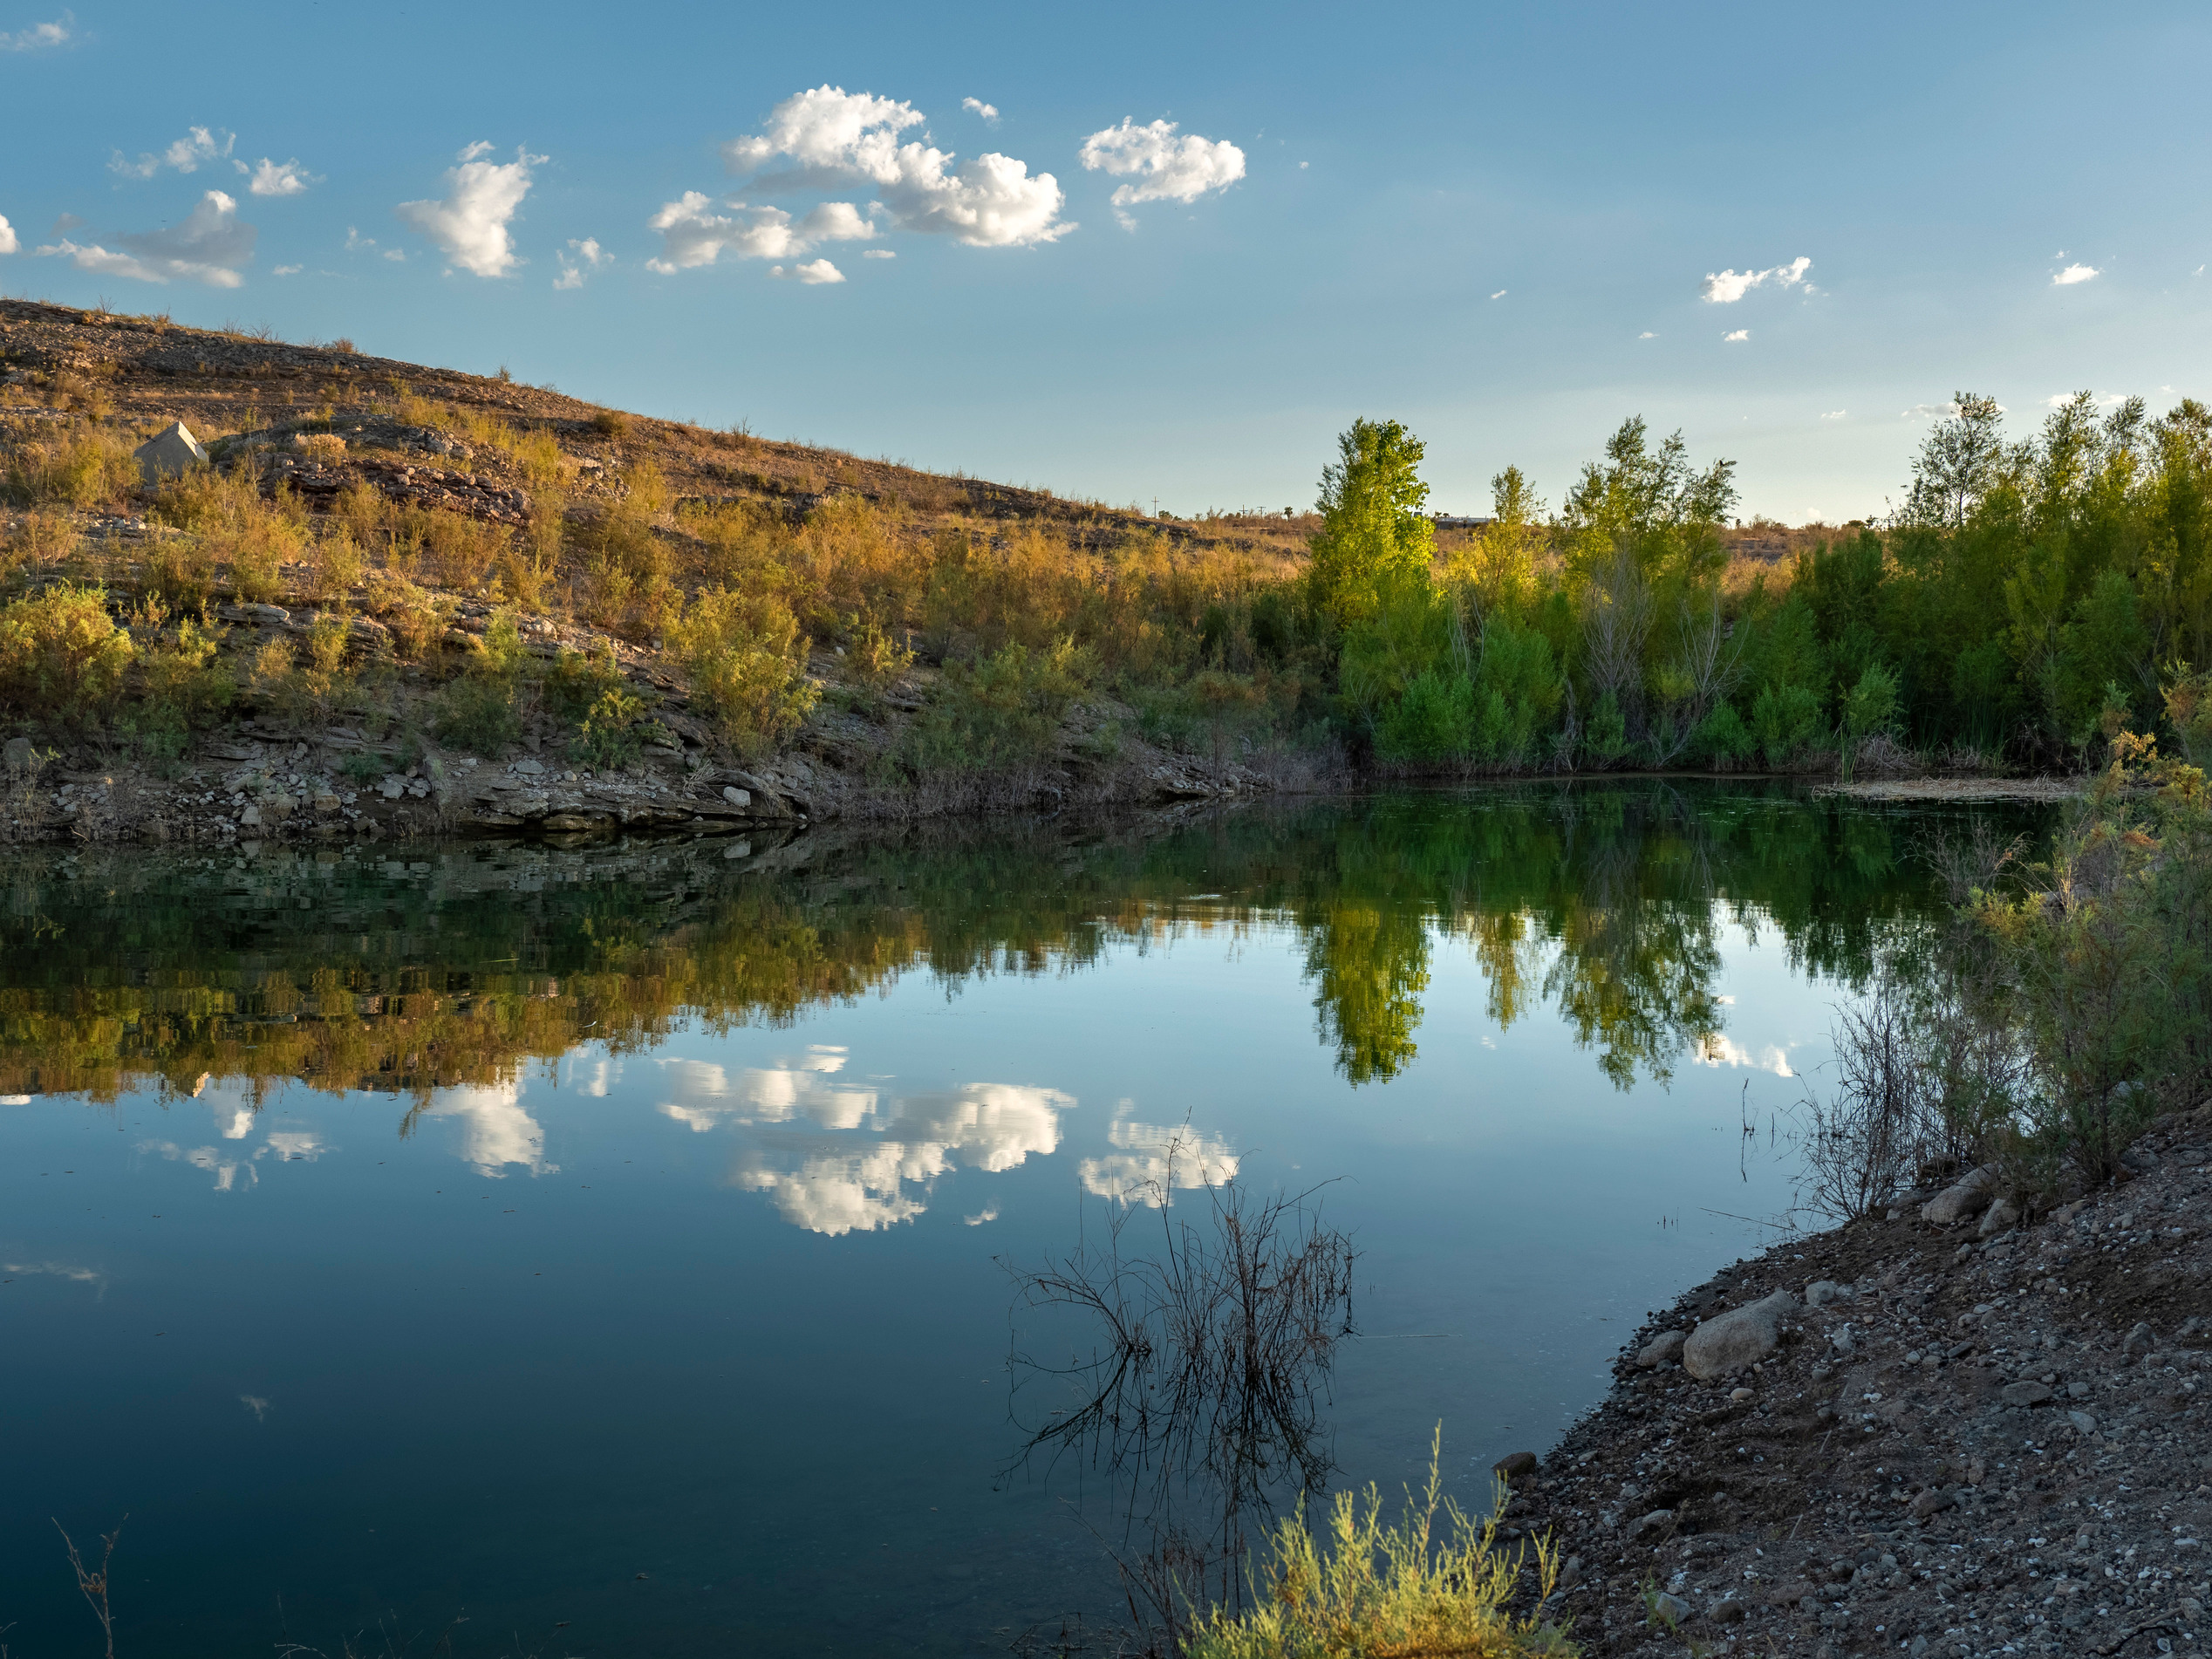 Trees and clouds reflected in body of water surrounded on three sides by trees and desert